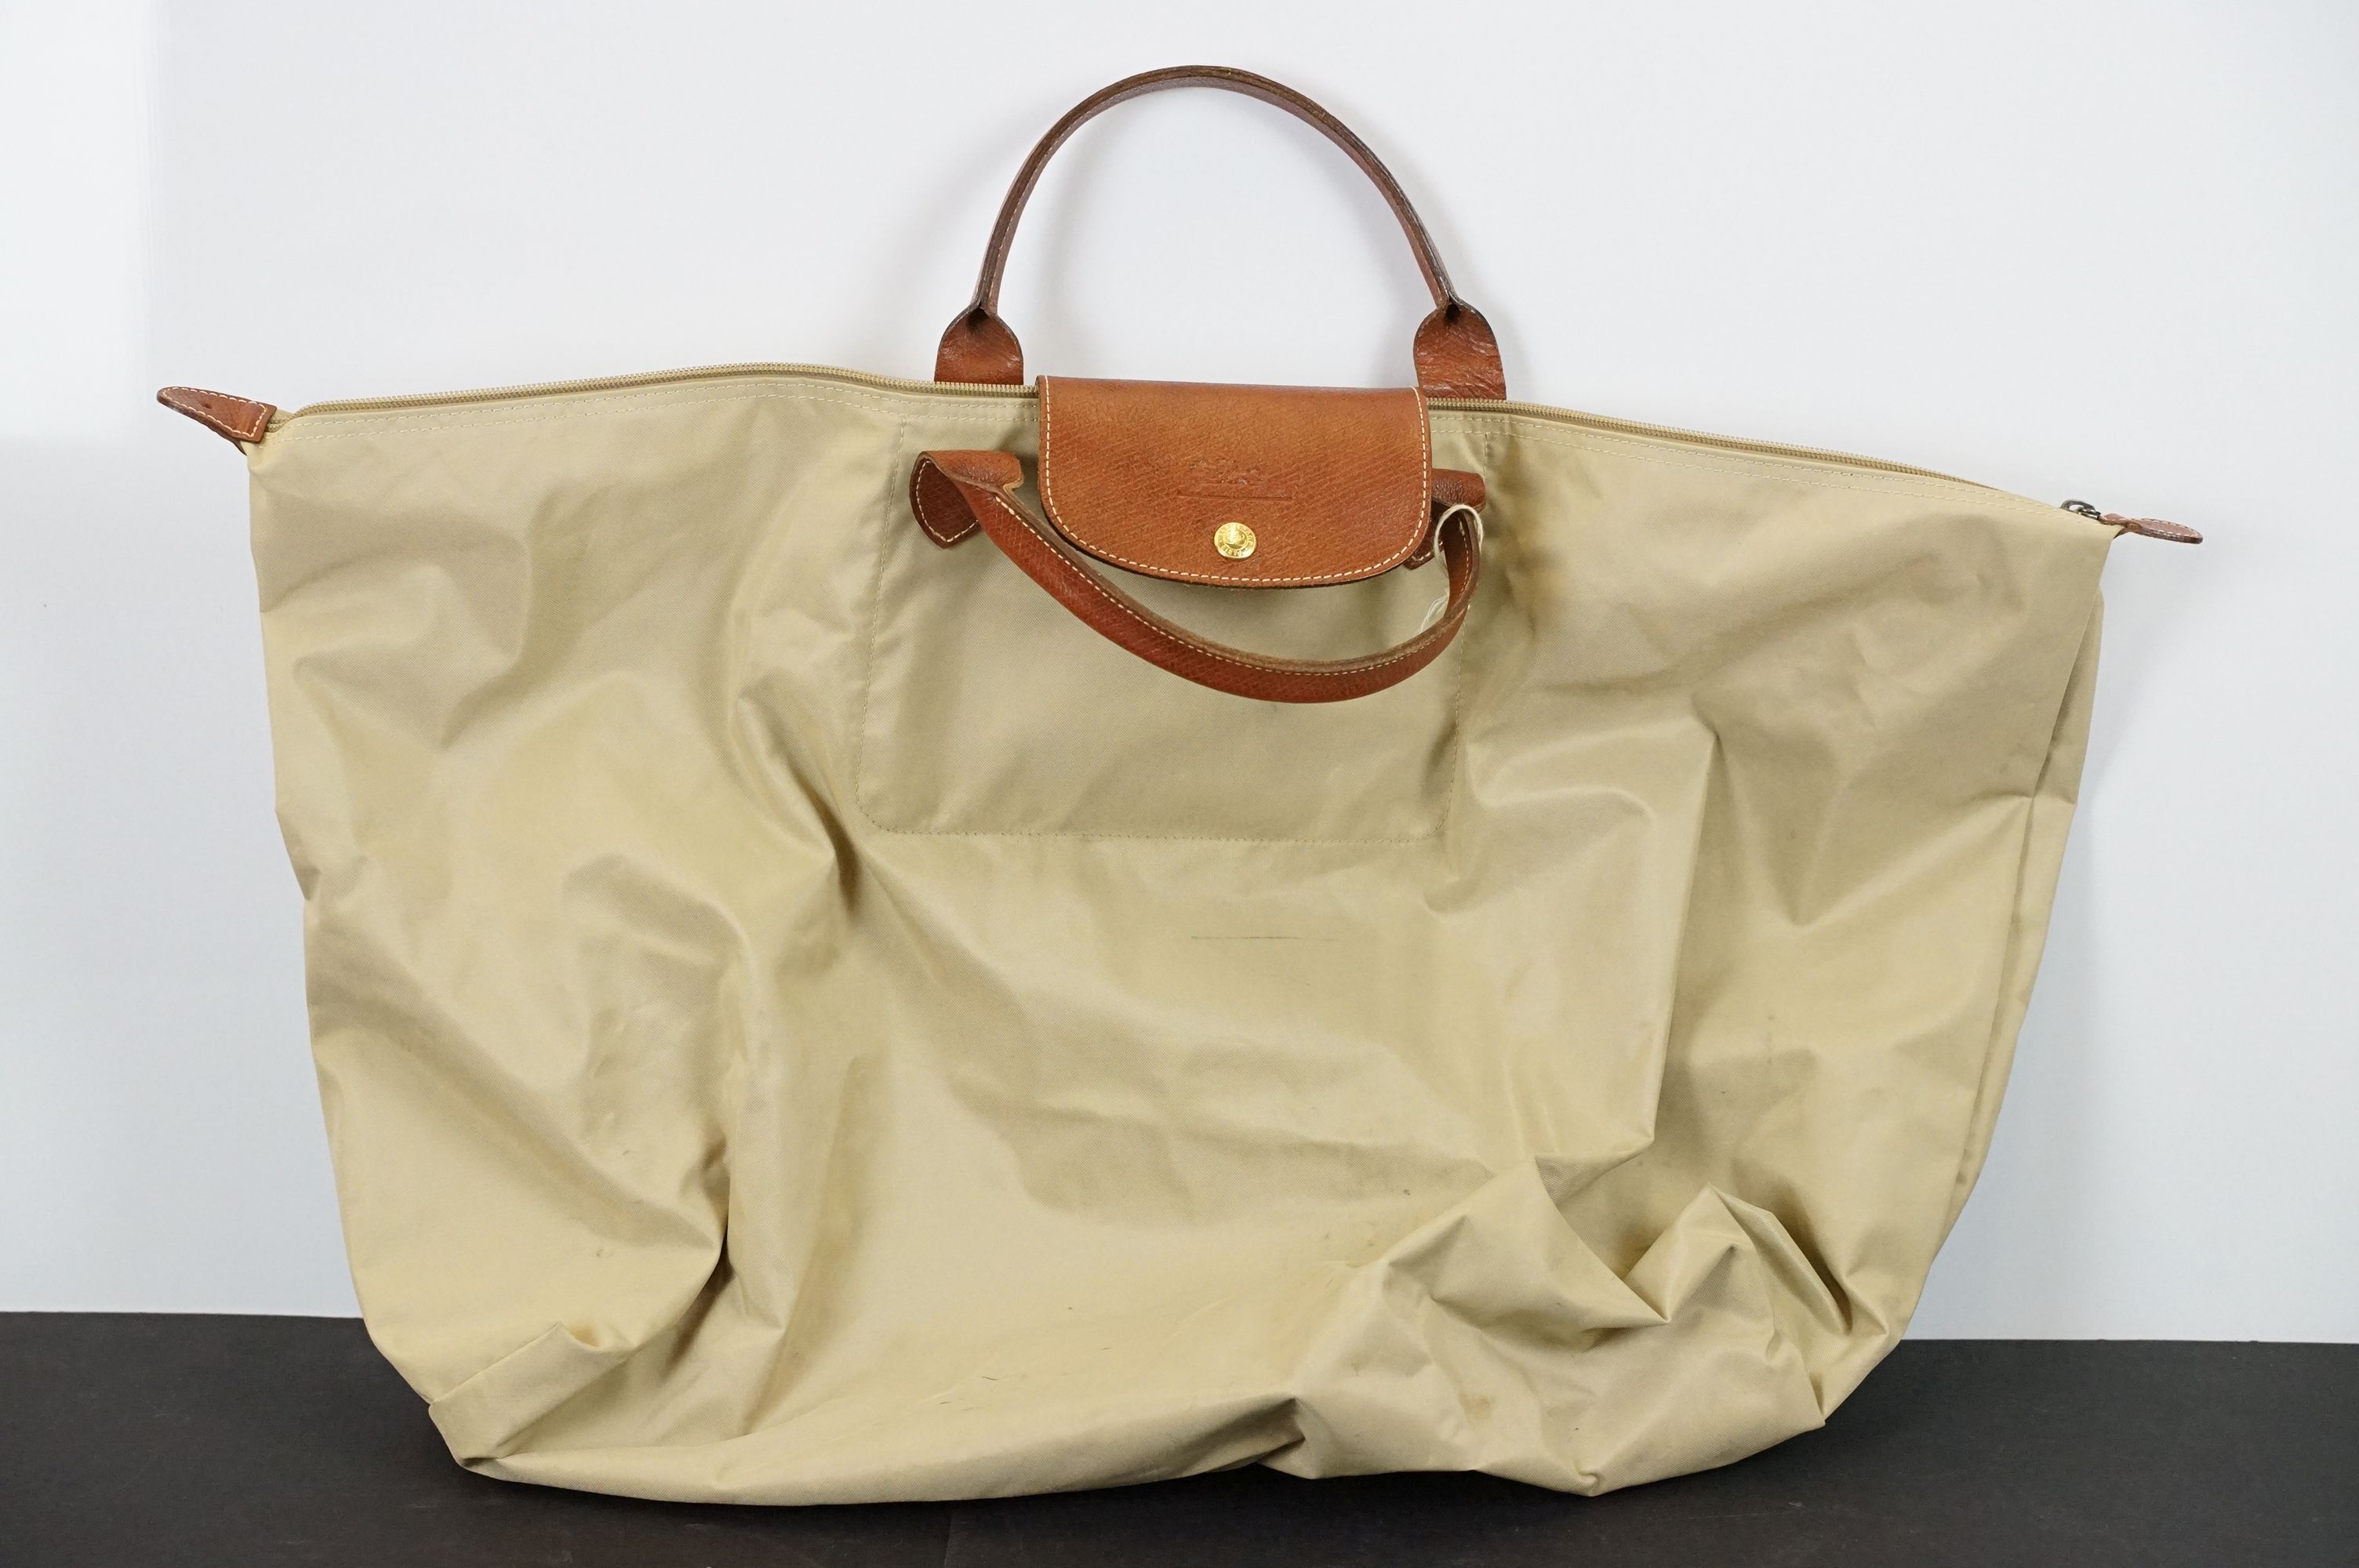 Longchamp holdall bag with tanned leather handles together with a Gianni Conti black leather - Image 2 of 17